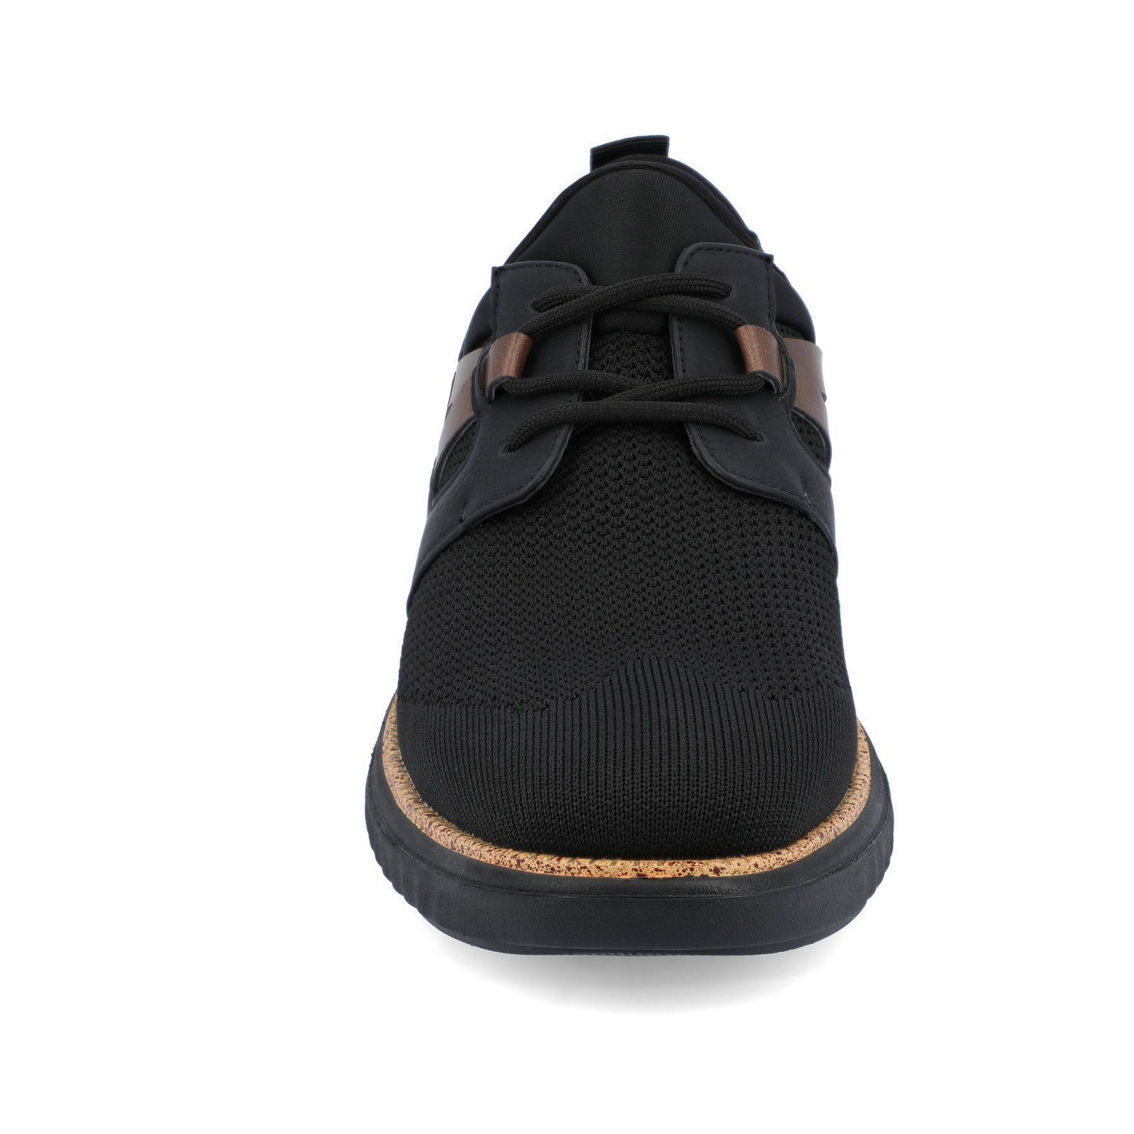 Vance Co. Claxton Knit Sneaker - Image 2 of 5